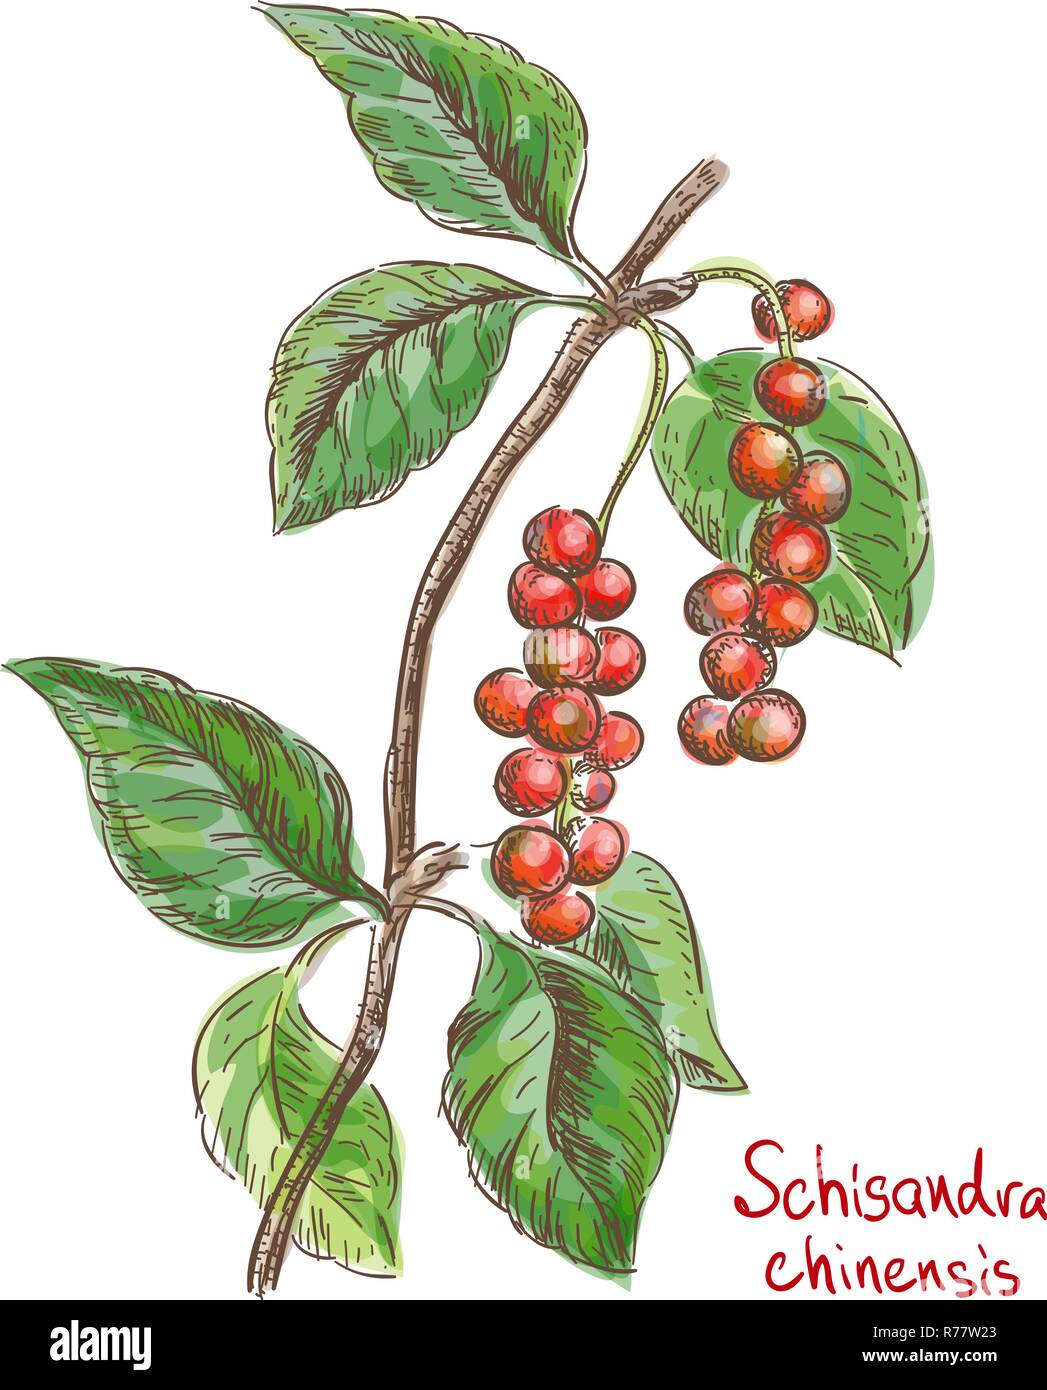 Schisandra chinese or five flavor berry. Vector illustration Stock Vector